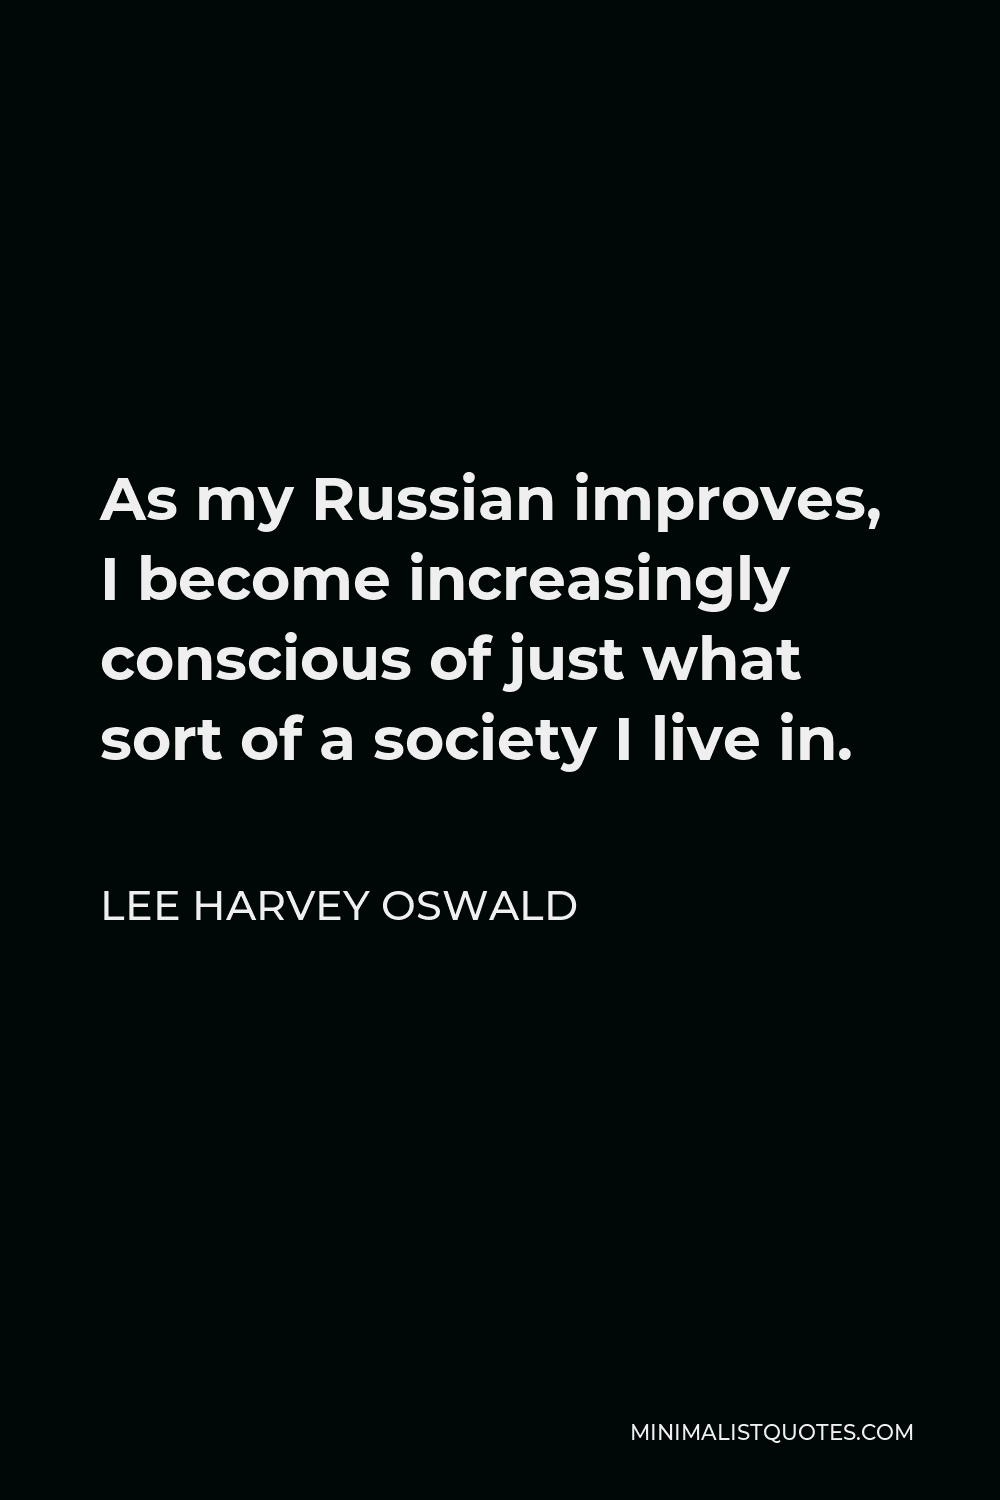 Lee Harvey Oswald Quote - As my Russian improves, I become increasingly conscious of just what sort of a society I live in.